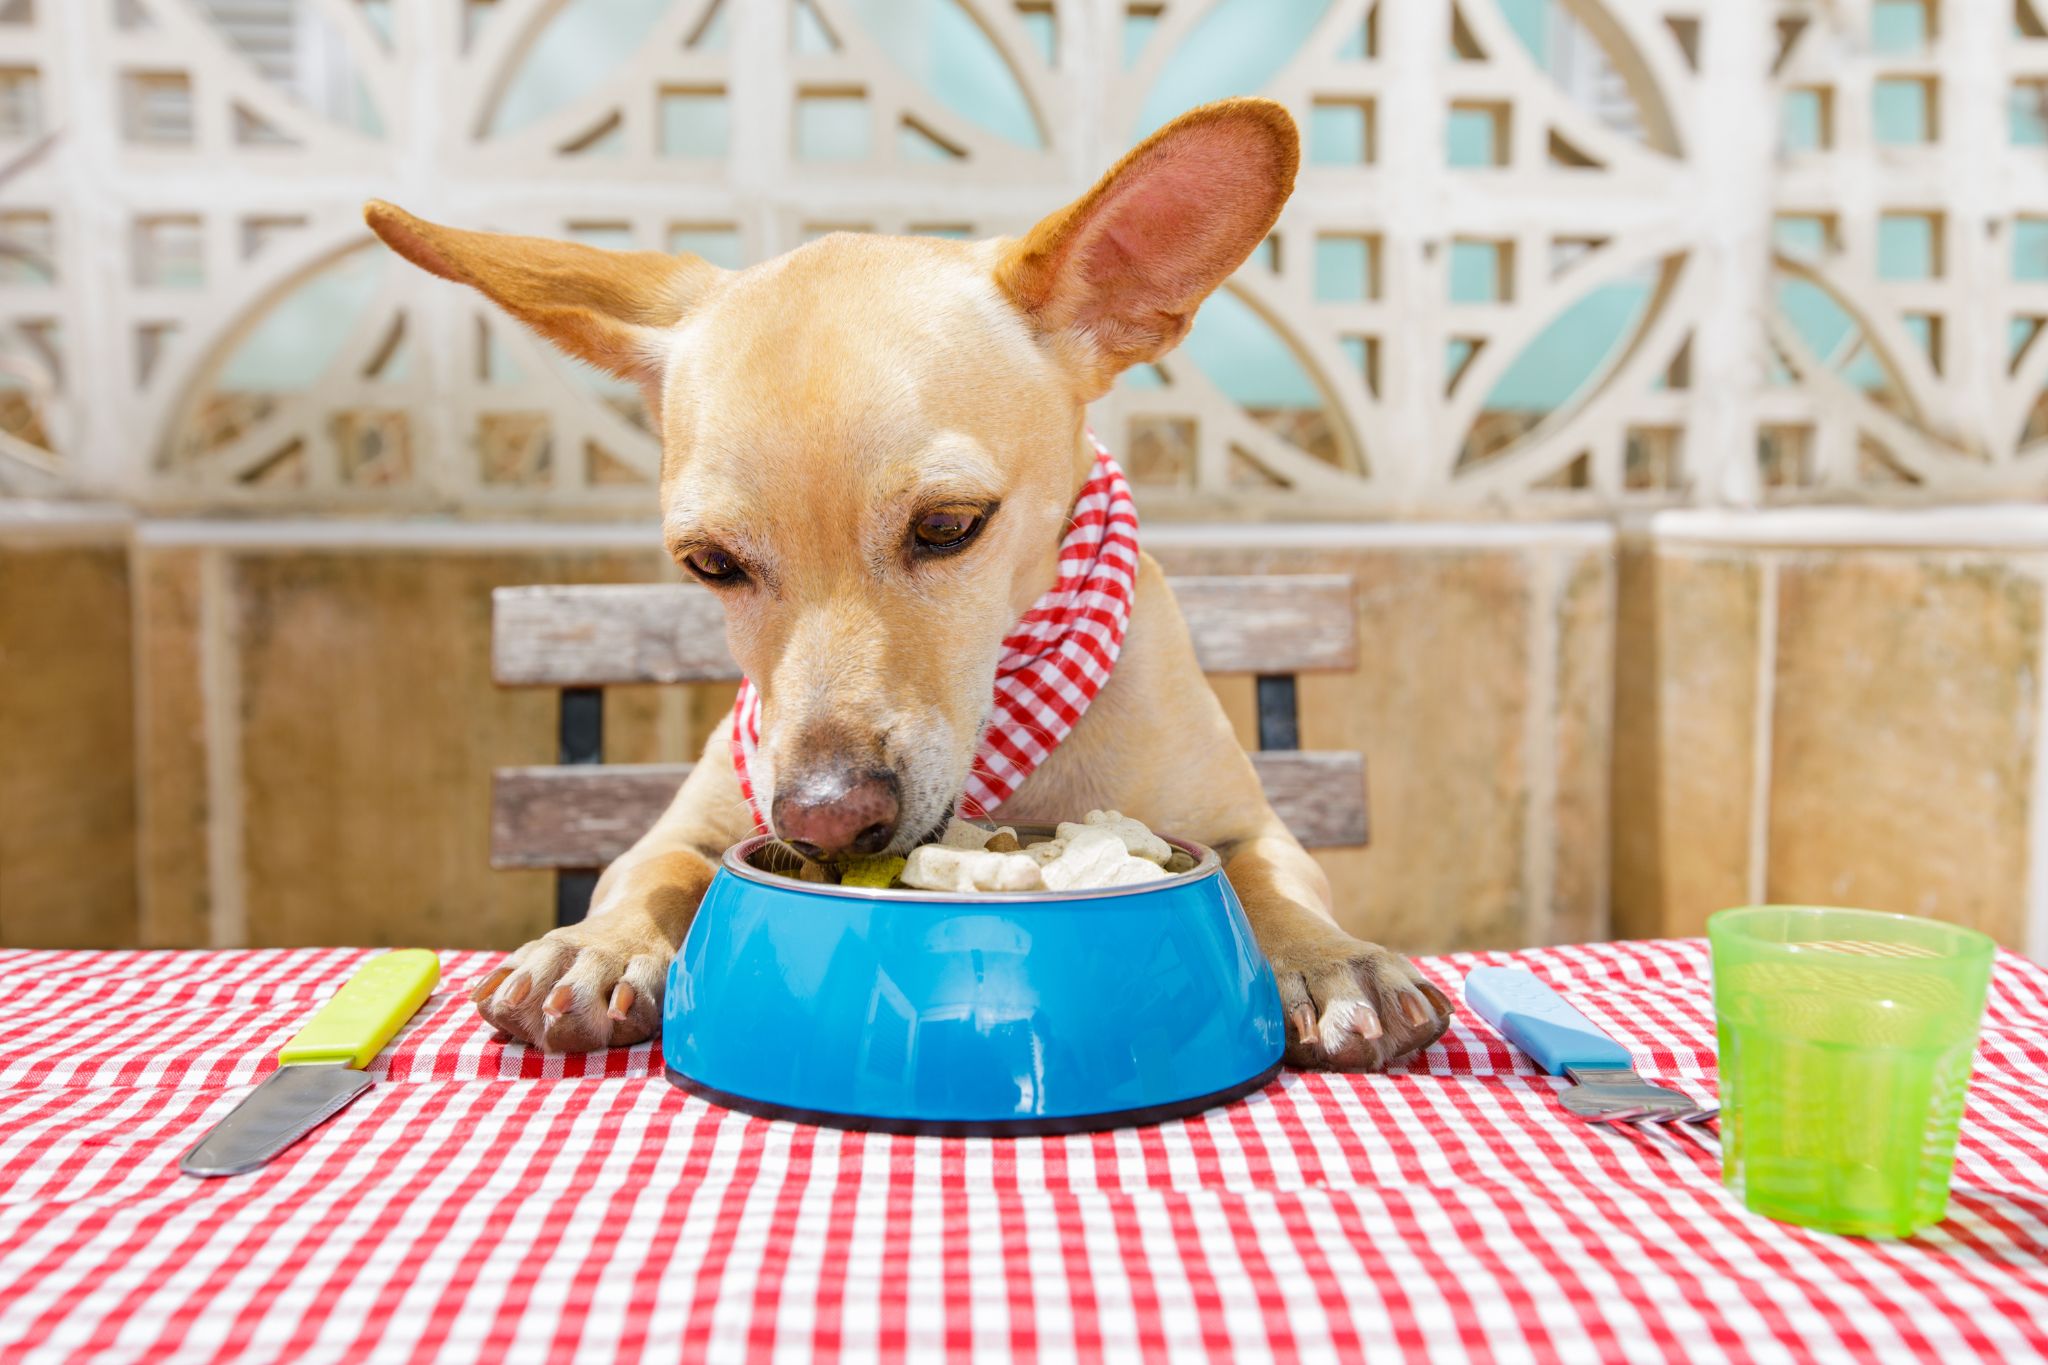 dog eating food at the table